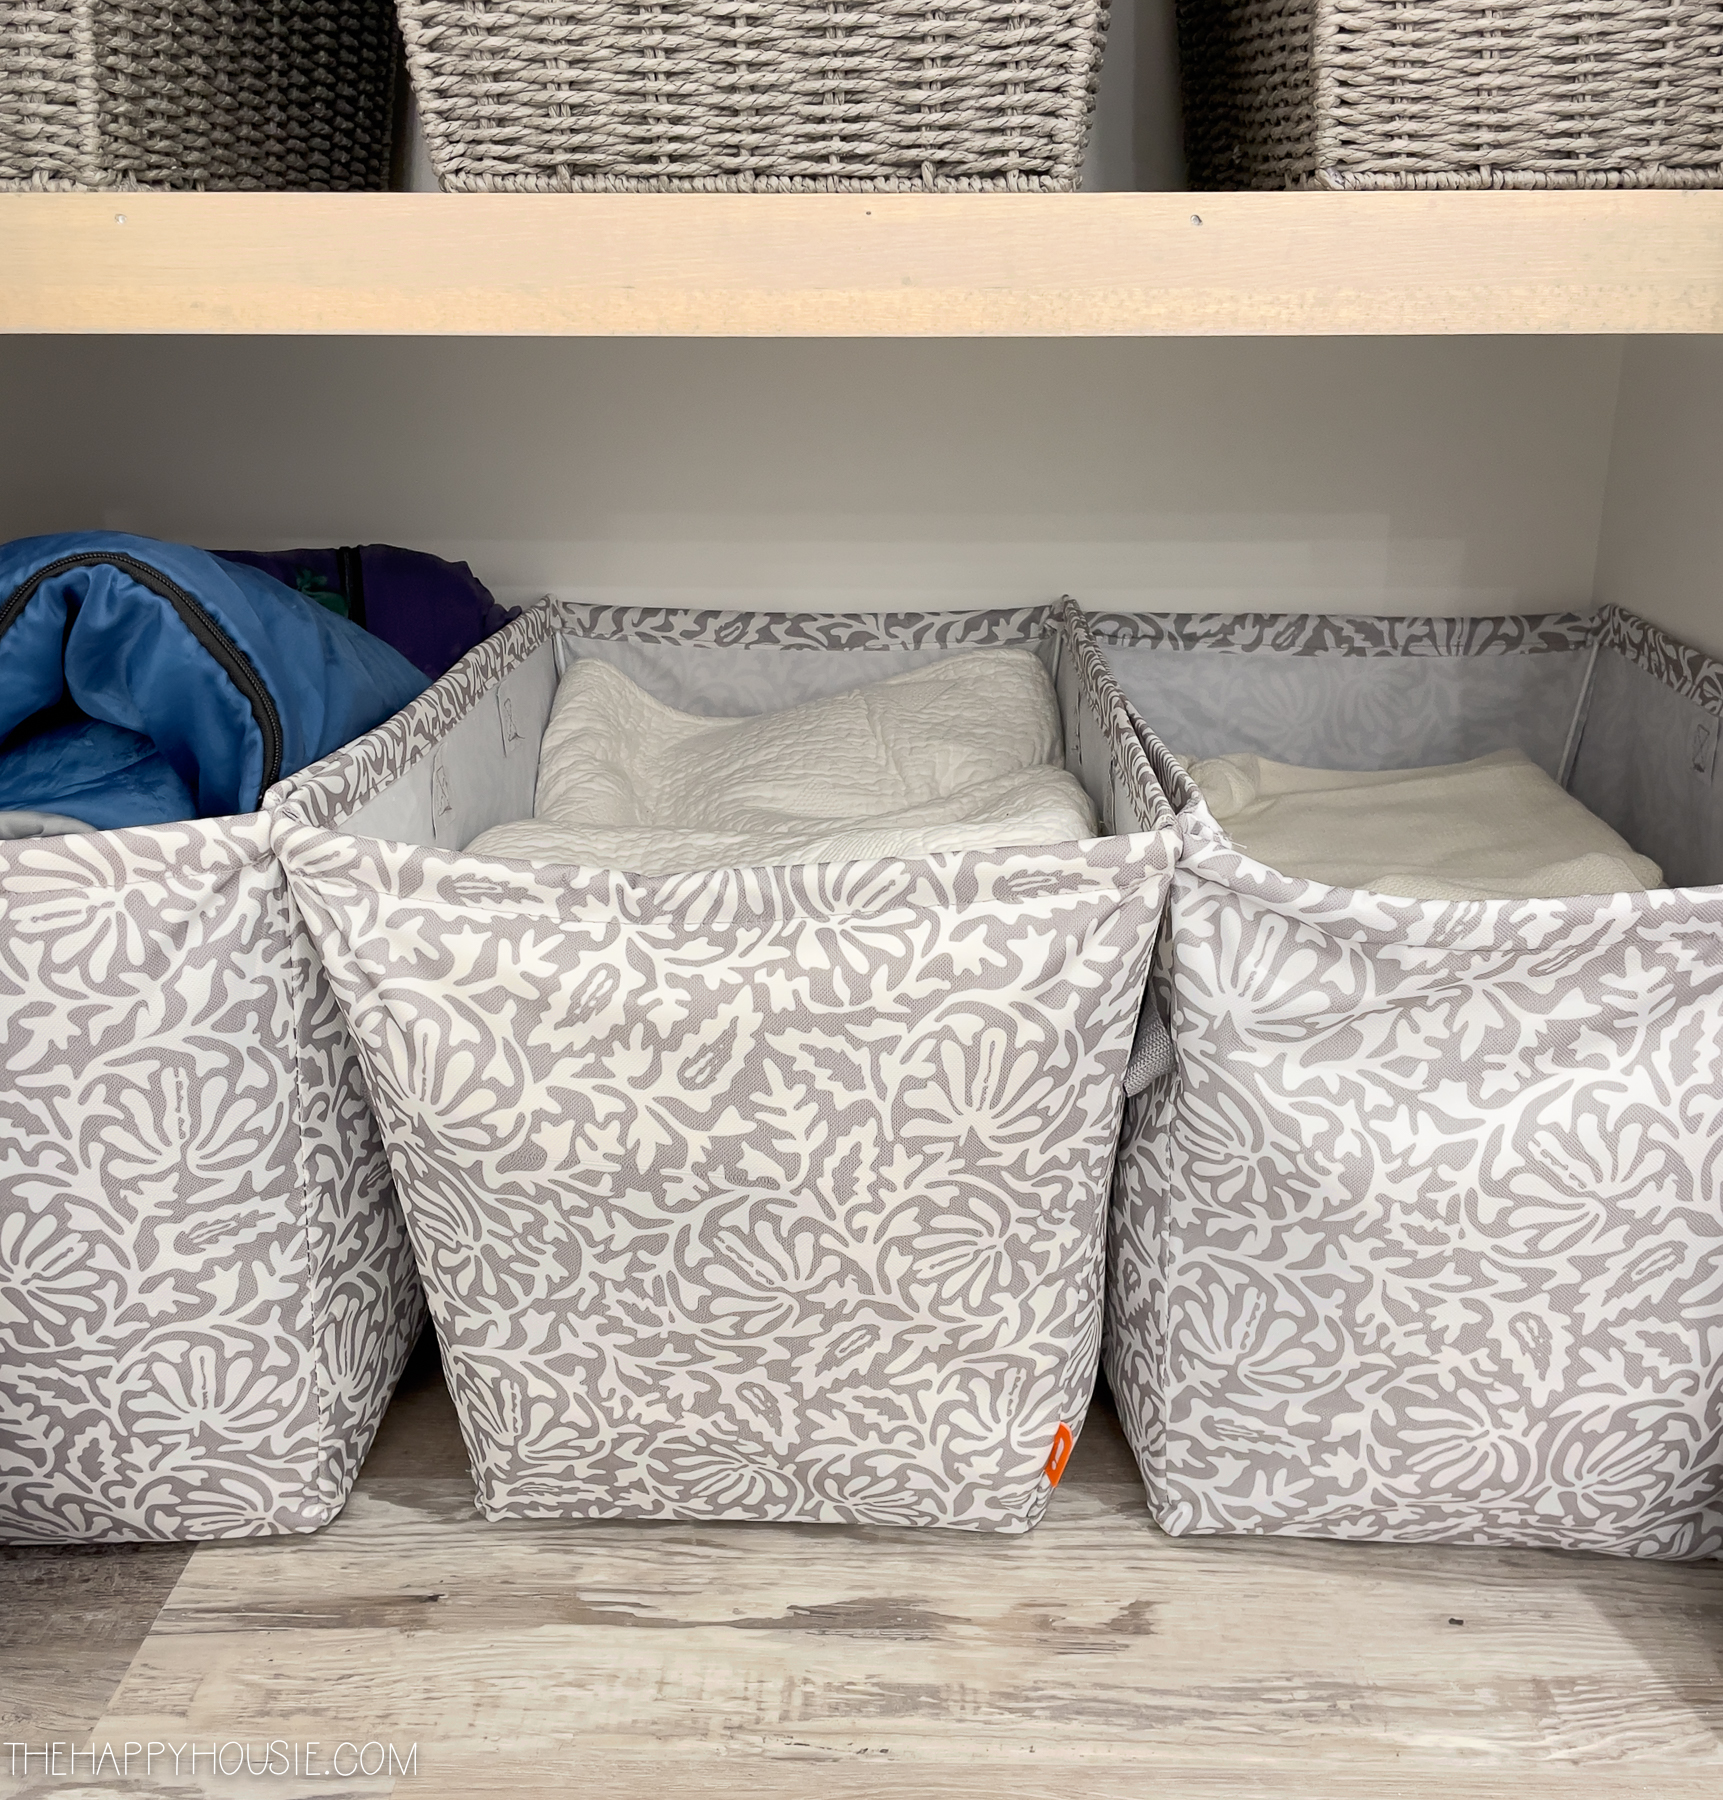 Cloth baskets with linen inside on the shelves.